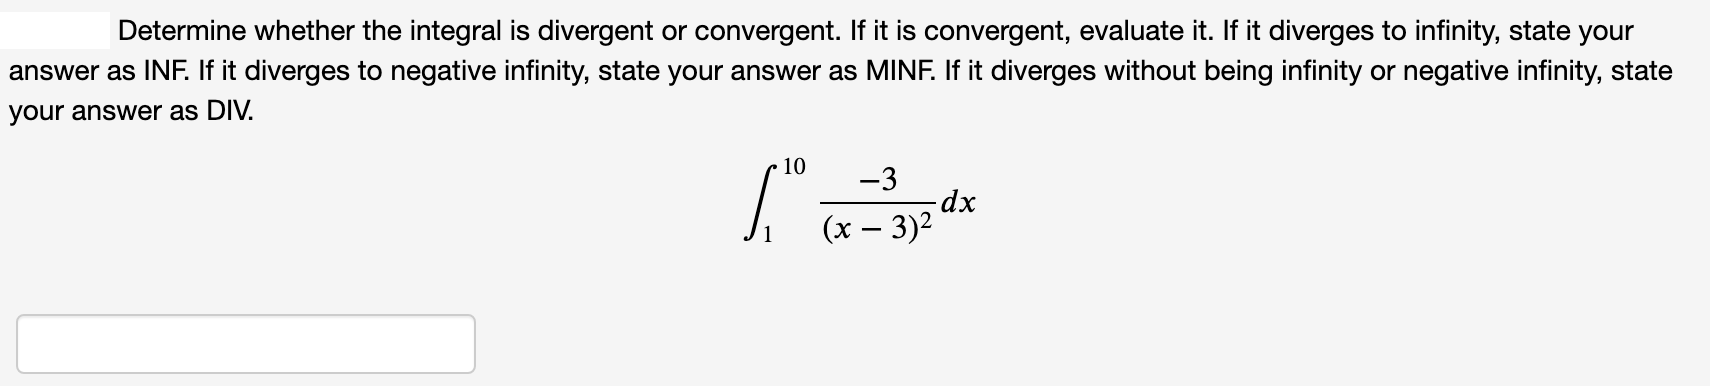 Determine whether the integral is divergent or convergent. If it is convergent, evaluate it. If it diverges to infinity, state your
answer as INF. If it diverges to negative infinity, state your answer as MINF. If it diverges without being infinity or negative infinity, state
your answer as DIV.
10
-3
-dp-
(x – 3)2
